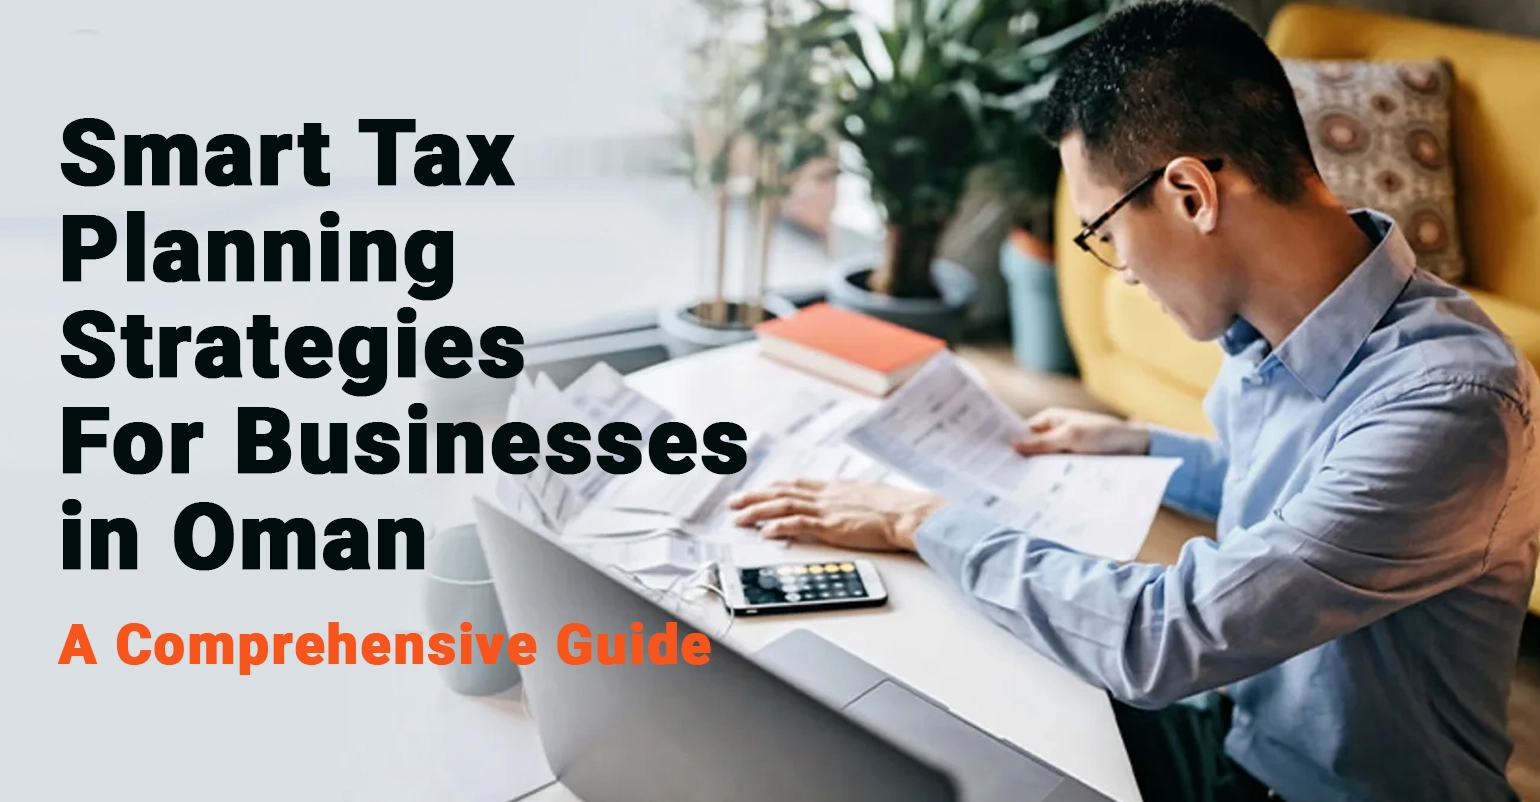 Smart Tax Planning Strategies for Businesses in Oman: A Comprehensive Guide